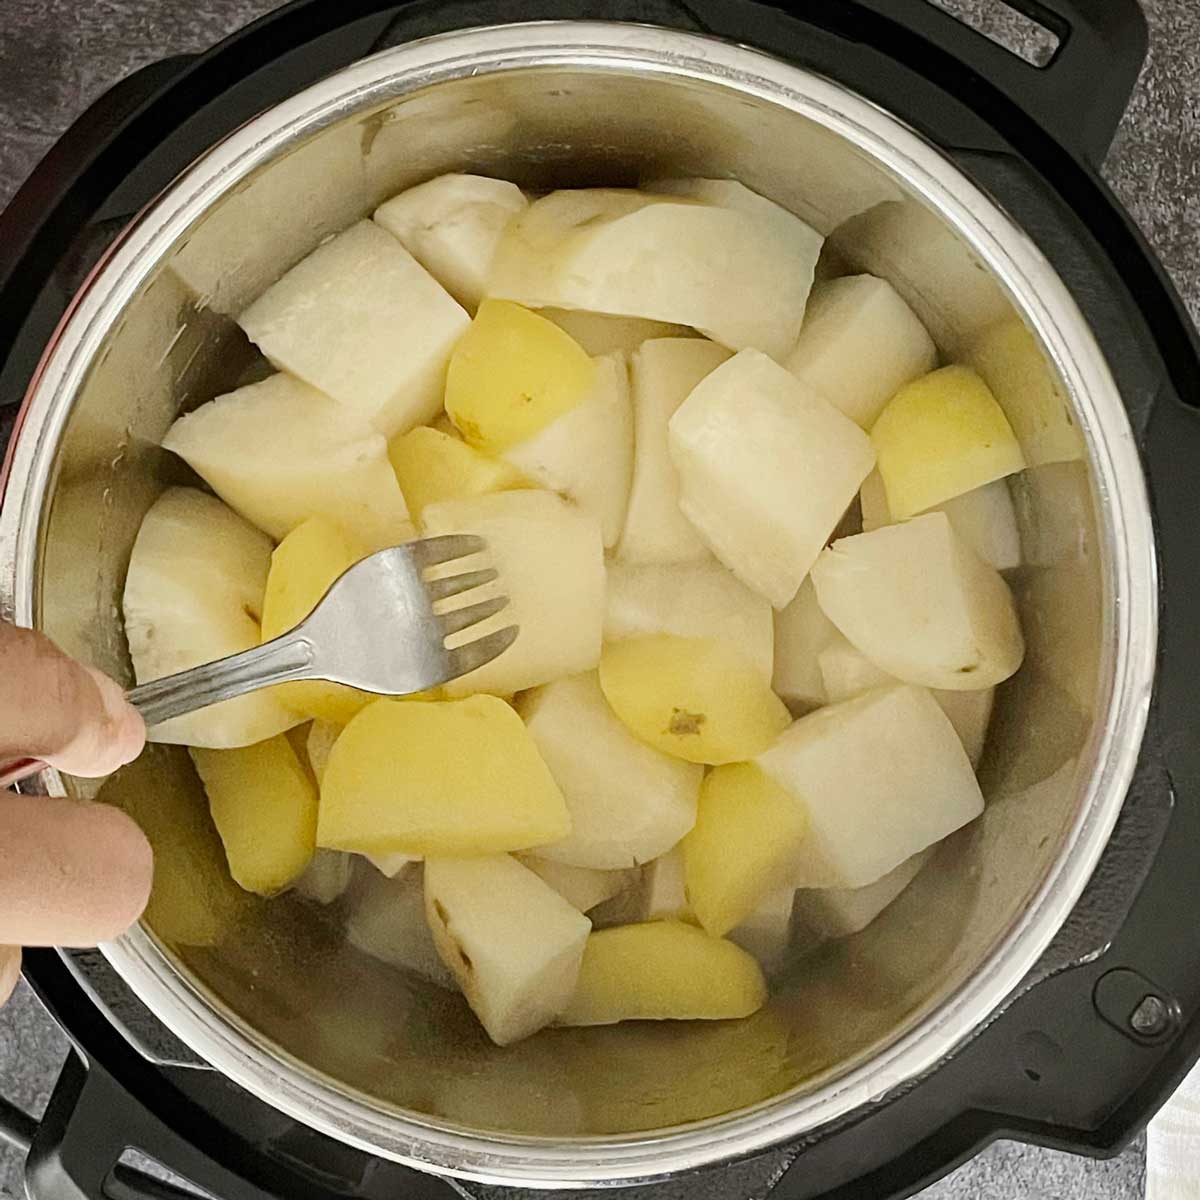 Steamed cubed potatoes.